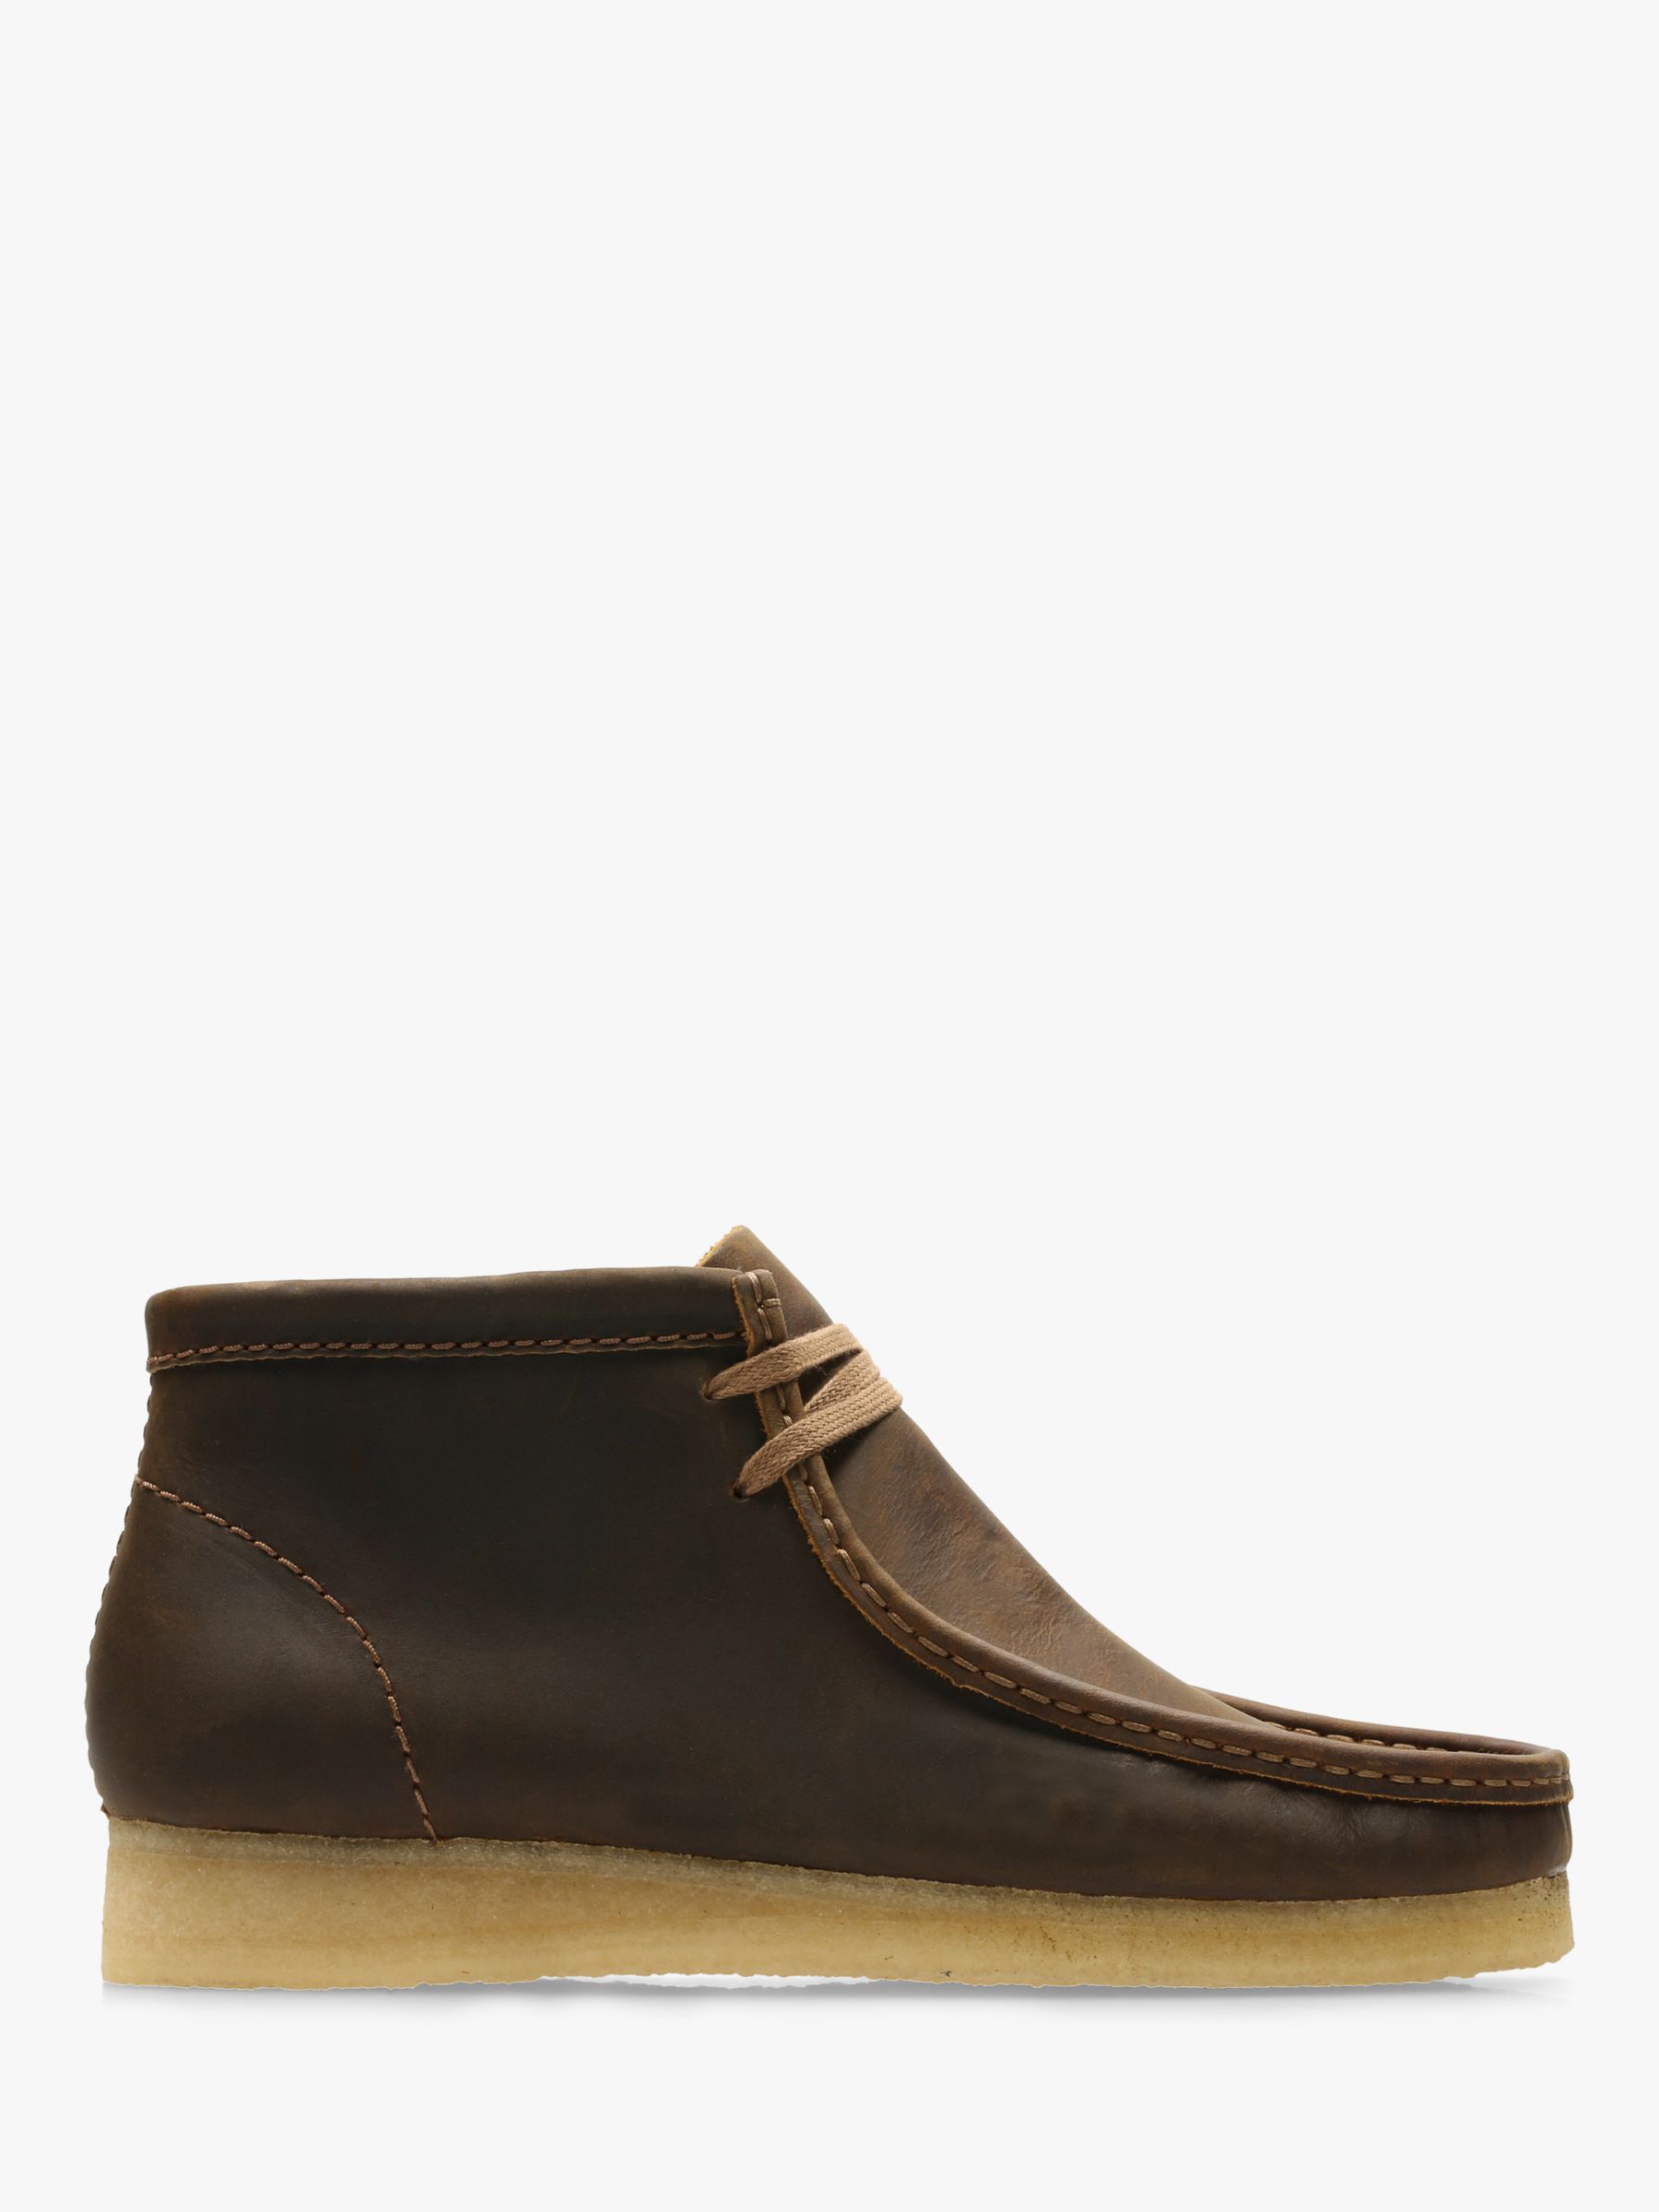 Clarks Originals Leather Wallabee Boots, Beeswax